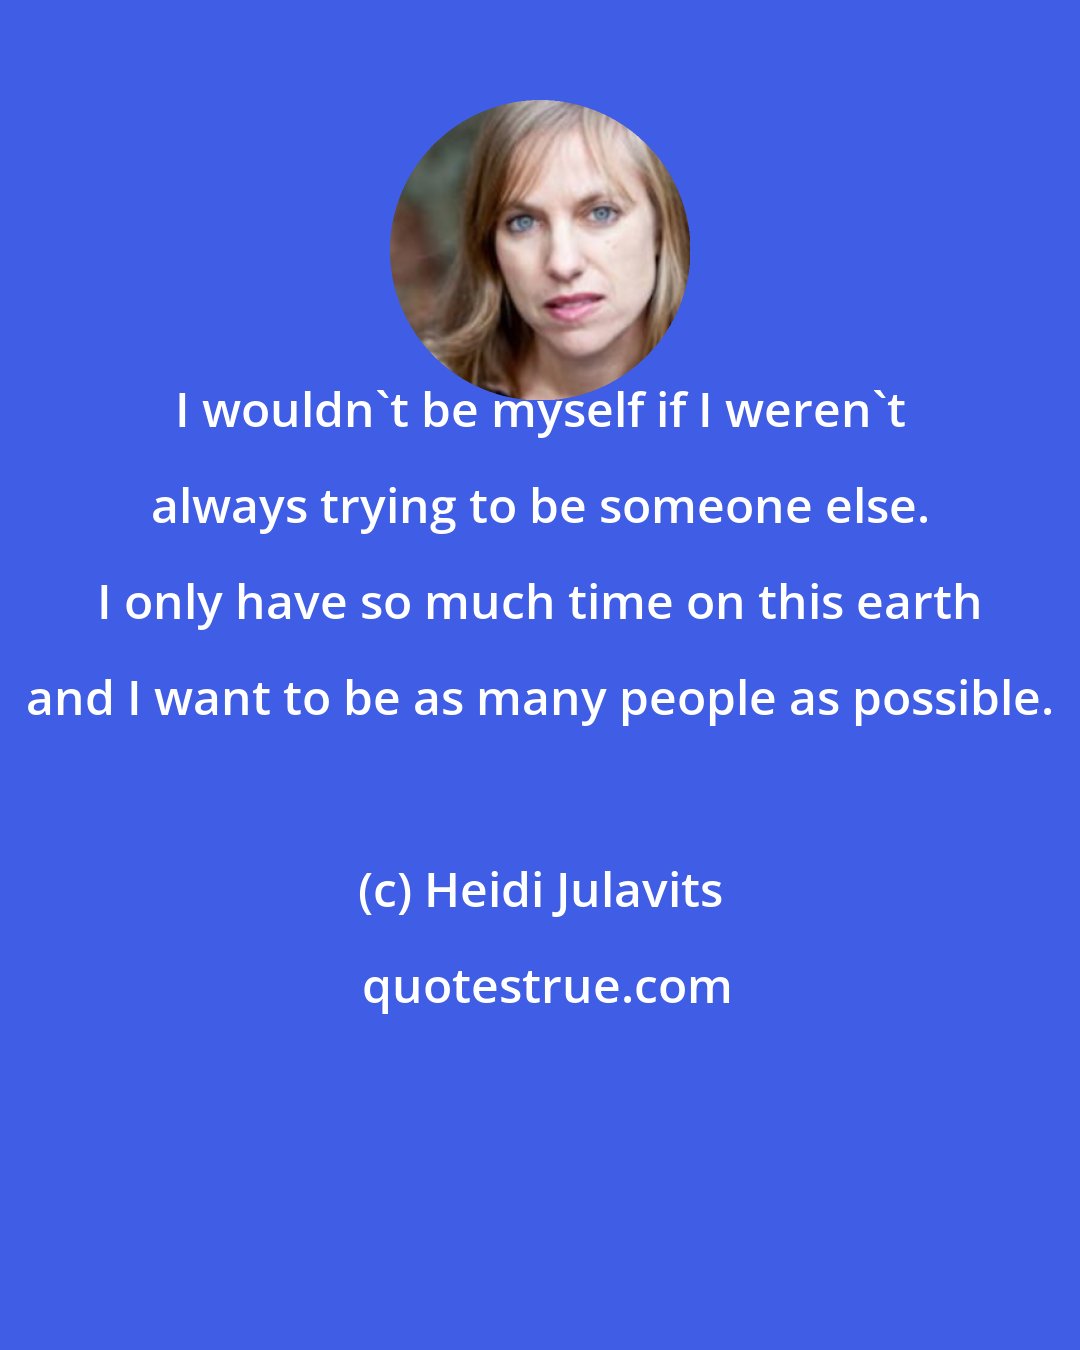 Heidi Julavits: I wouldn't be myself if I weren't always trying to be someone else. I only have so much time on this earth and I want to be as many people as possible.